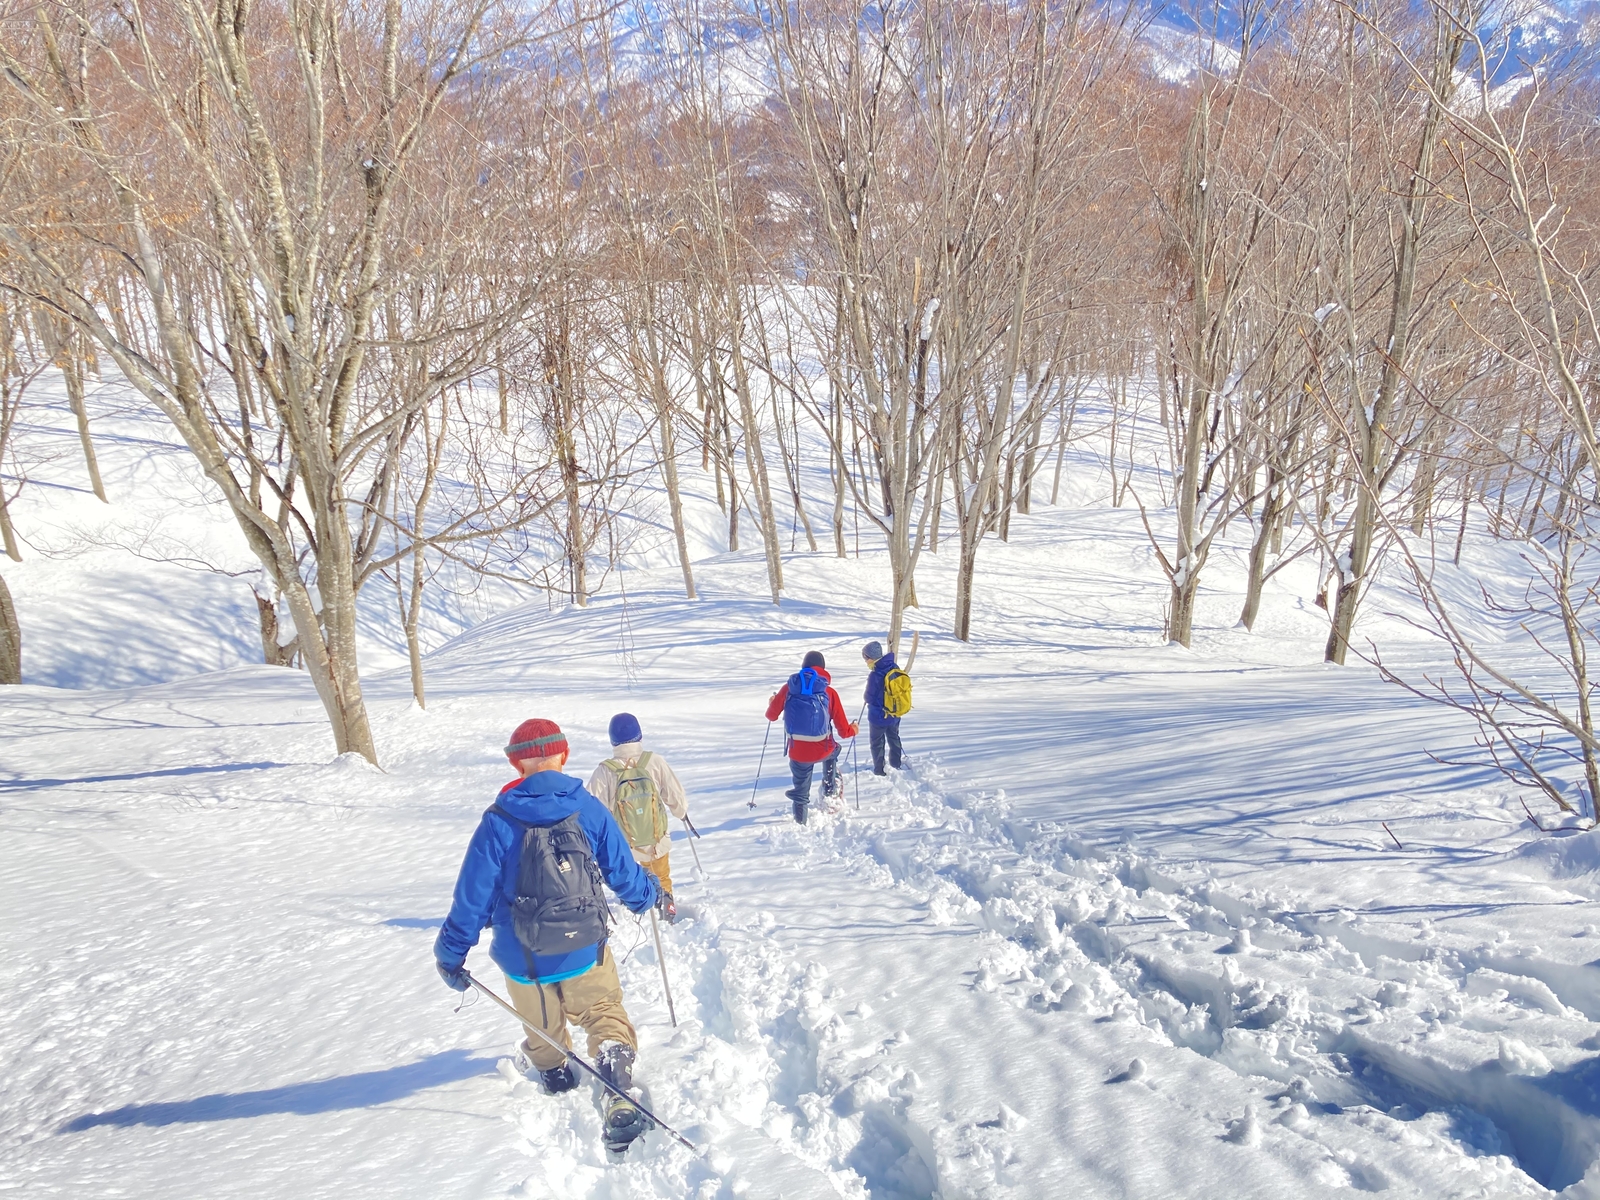 Cozy Cabins and Snowshoeing in Iiyama's Snow Country